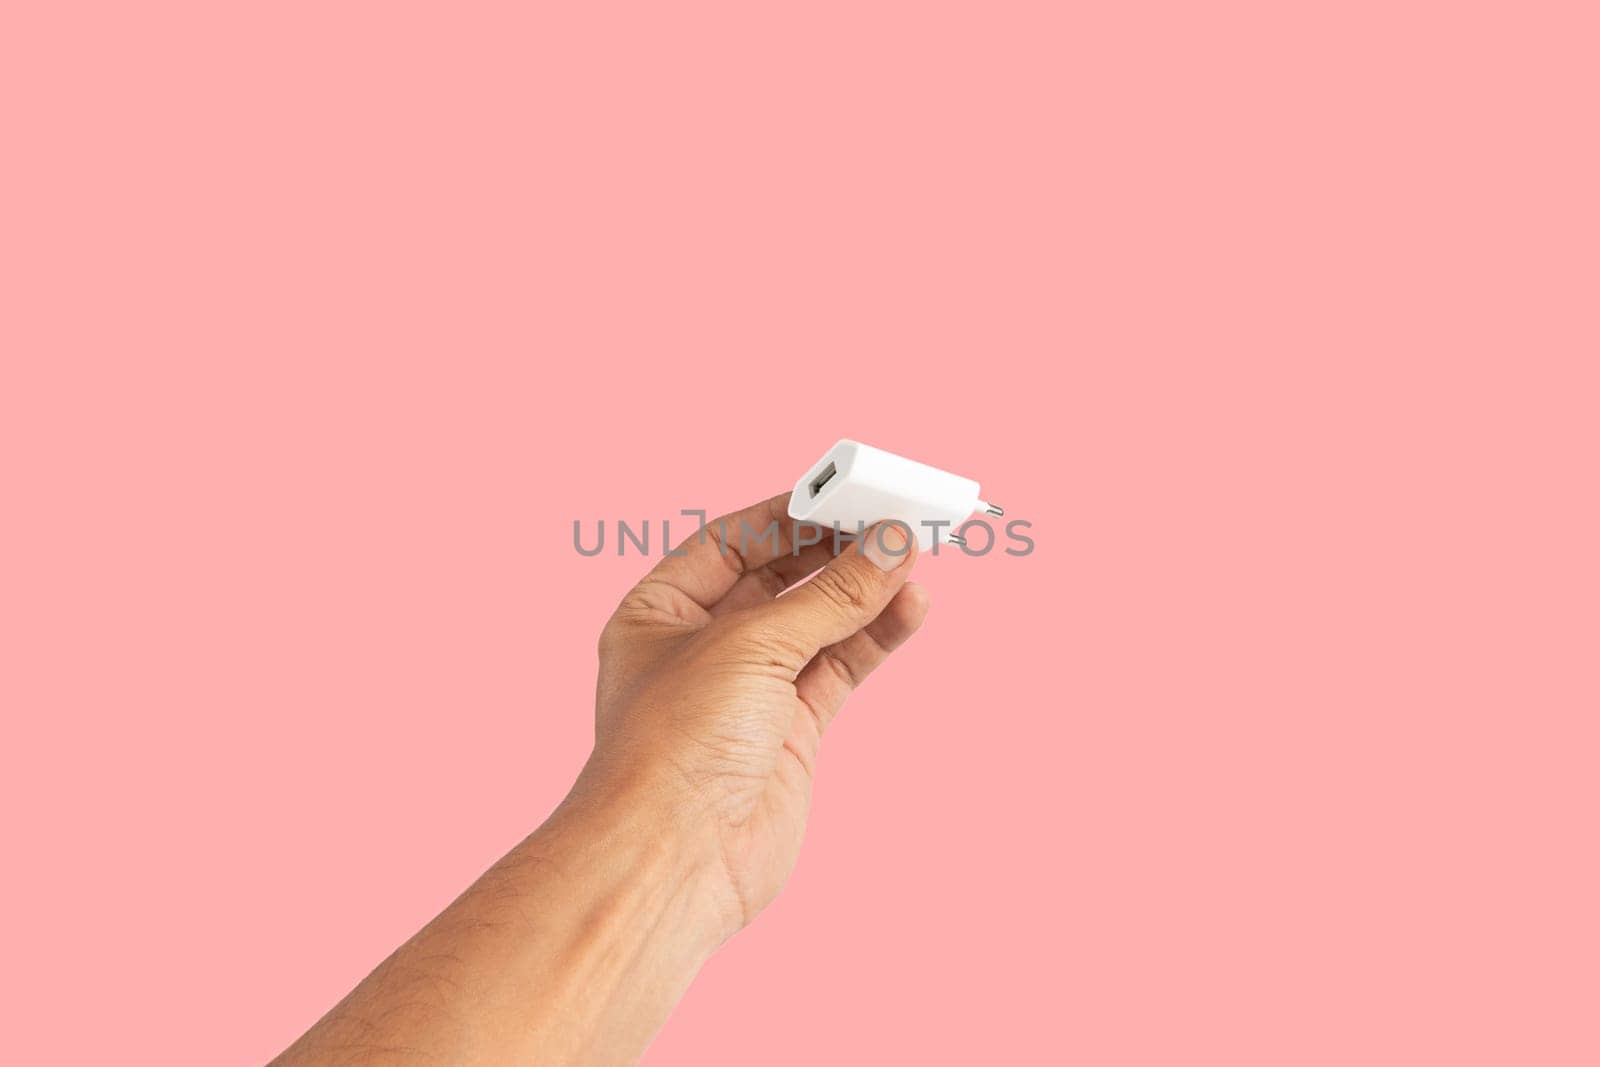 Black male hand holding a USB charger plug isolated on pink background. High quality photo